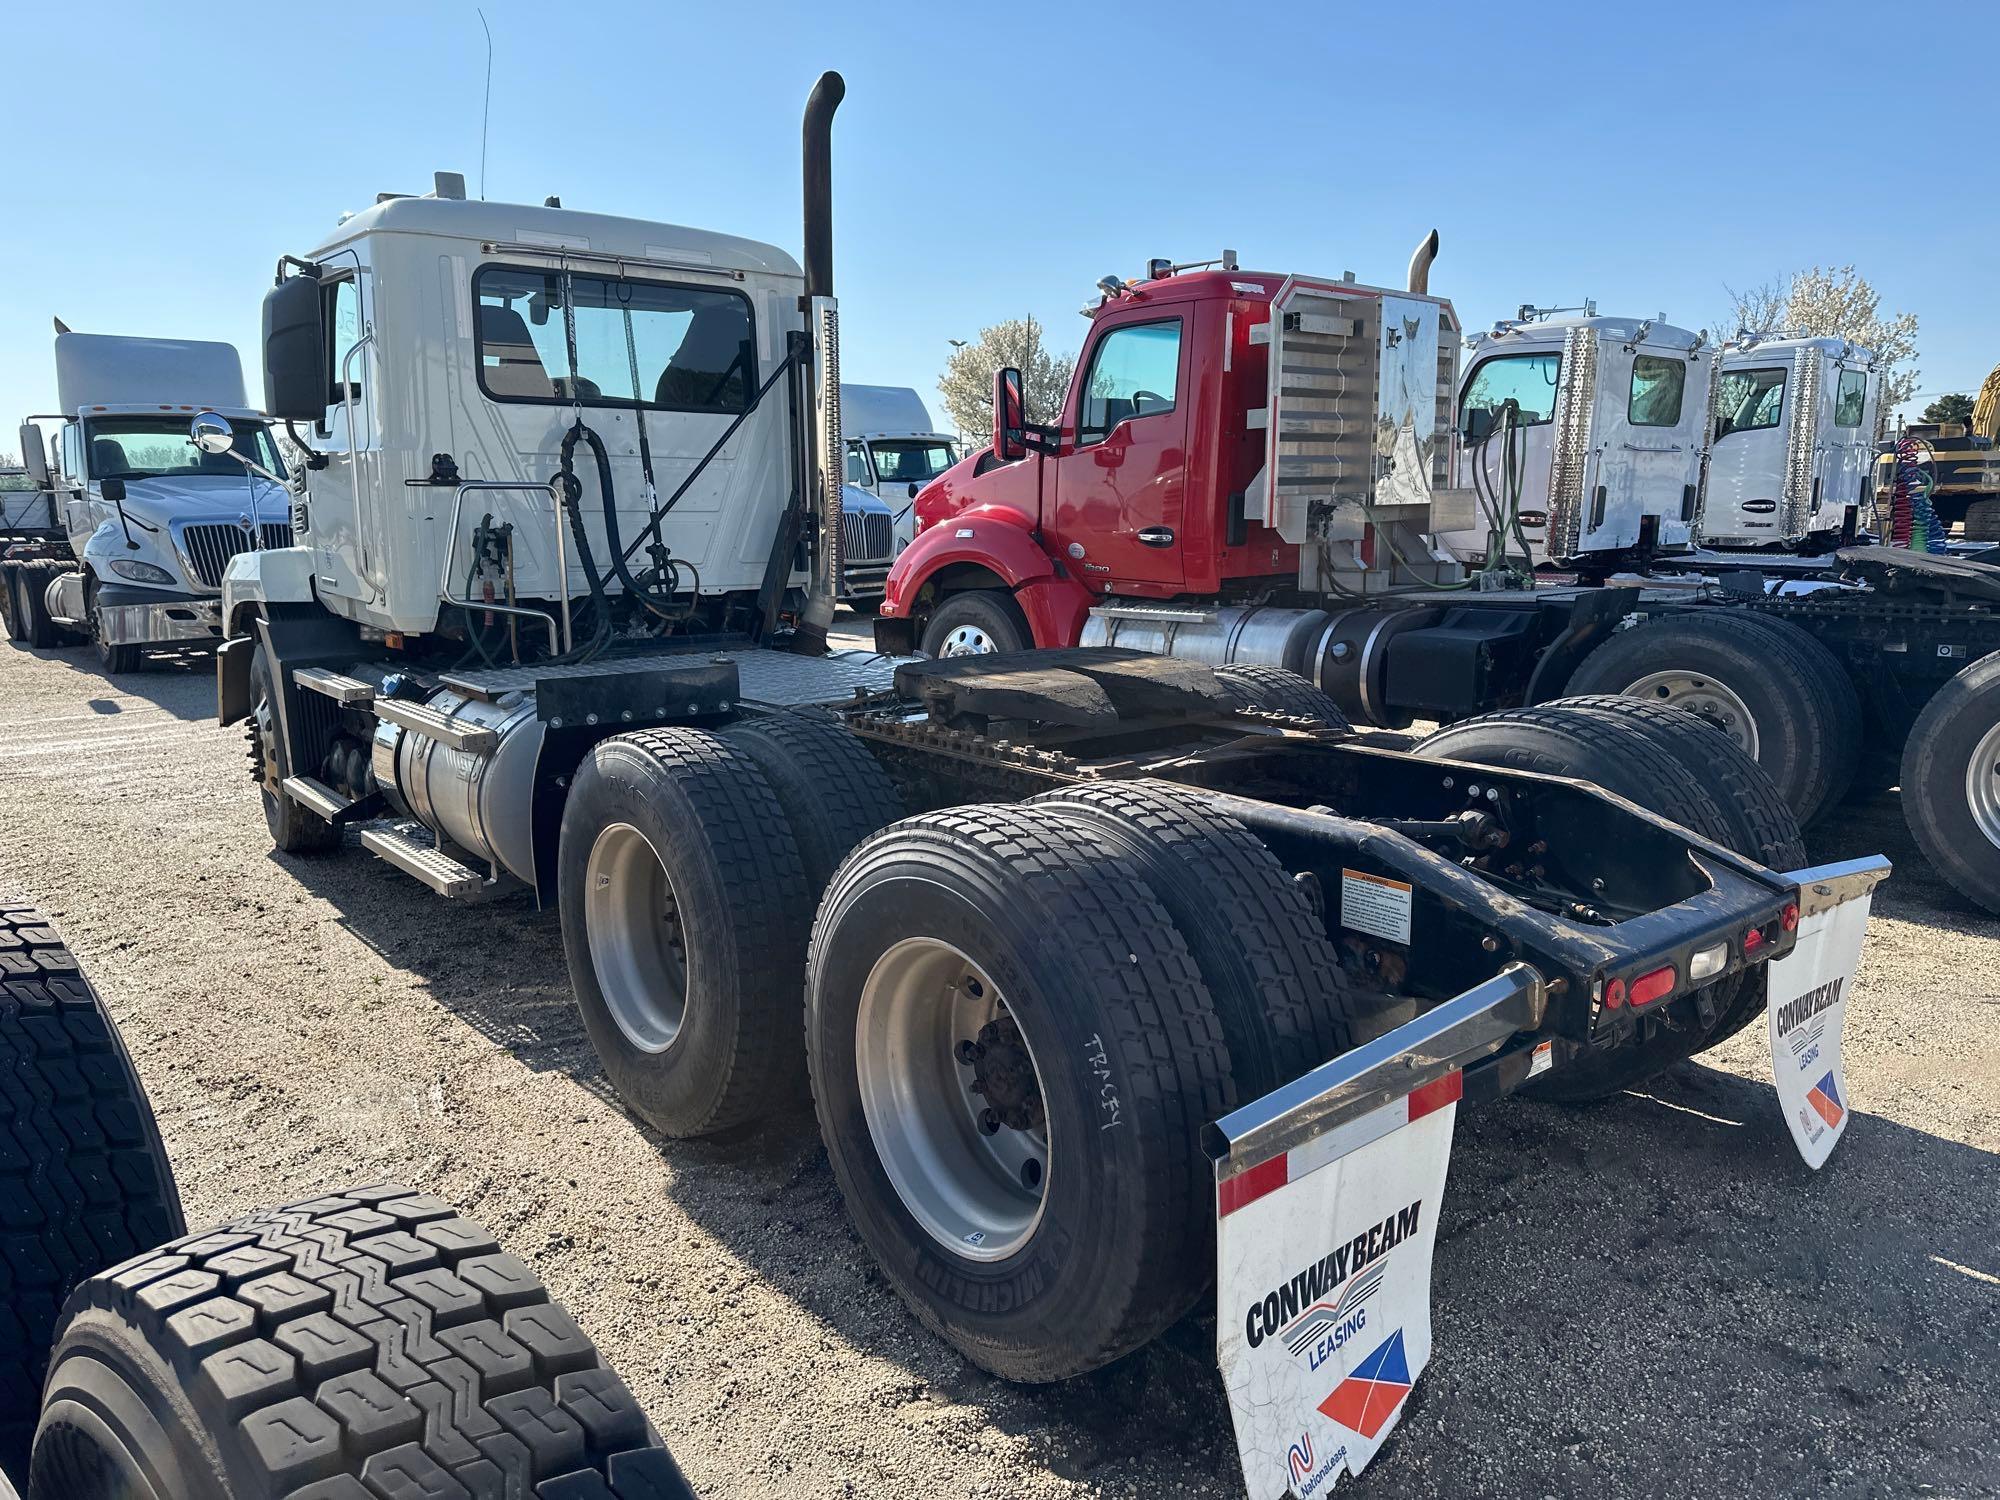 2019 MACK ANTHEM 64T TRUCK TRACTOR VIN:1M1AN4GY4KM008414 powered by Mack MP8 diesel engine, 505hp,